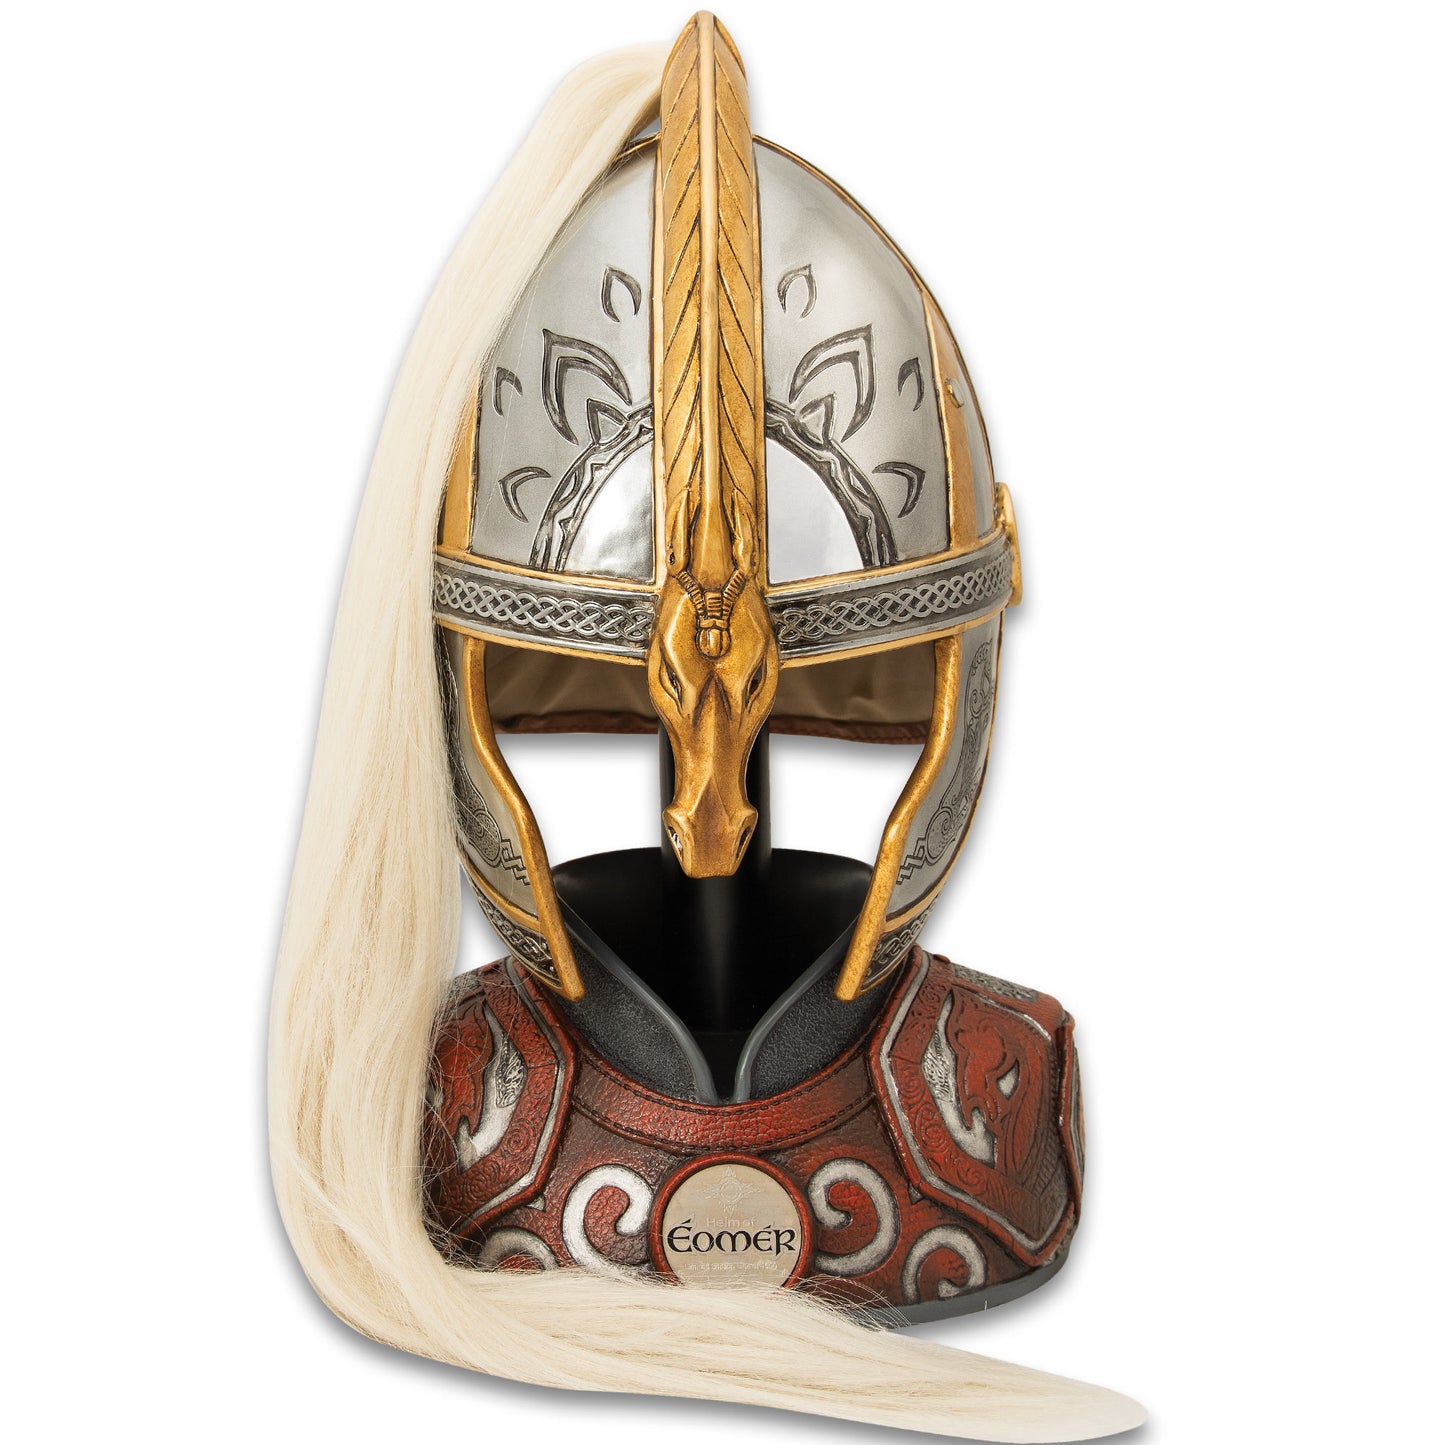 Helm Of Eomer (Lord of the Rings) Full-Scale Prop Replica with Display Stand